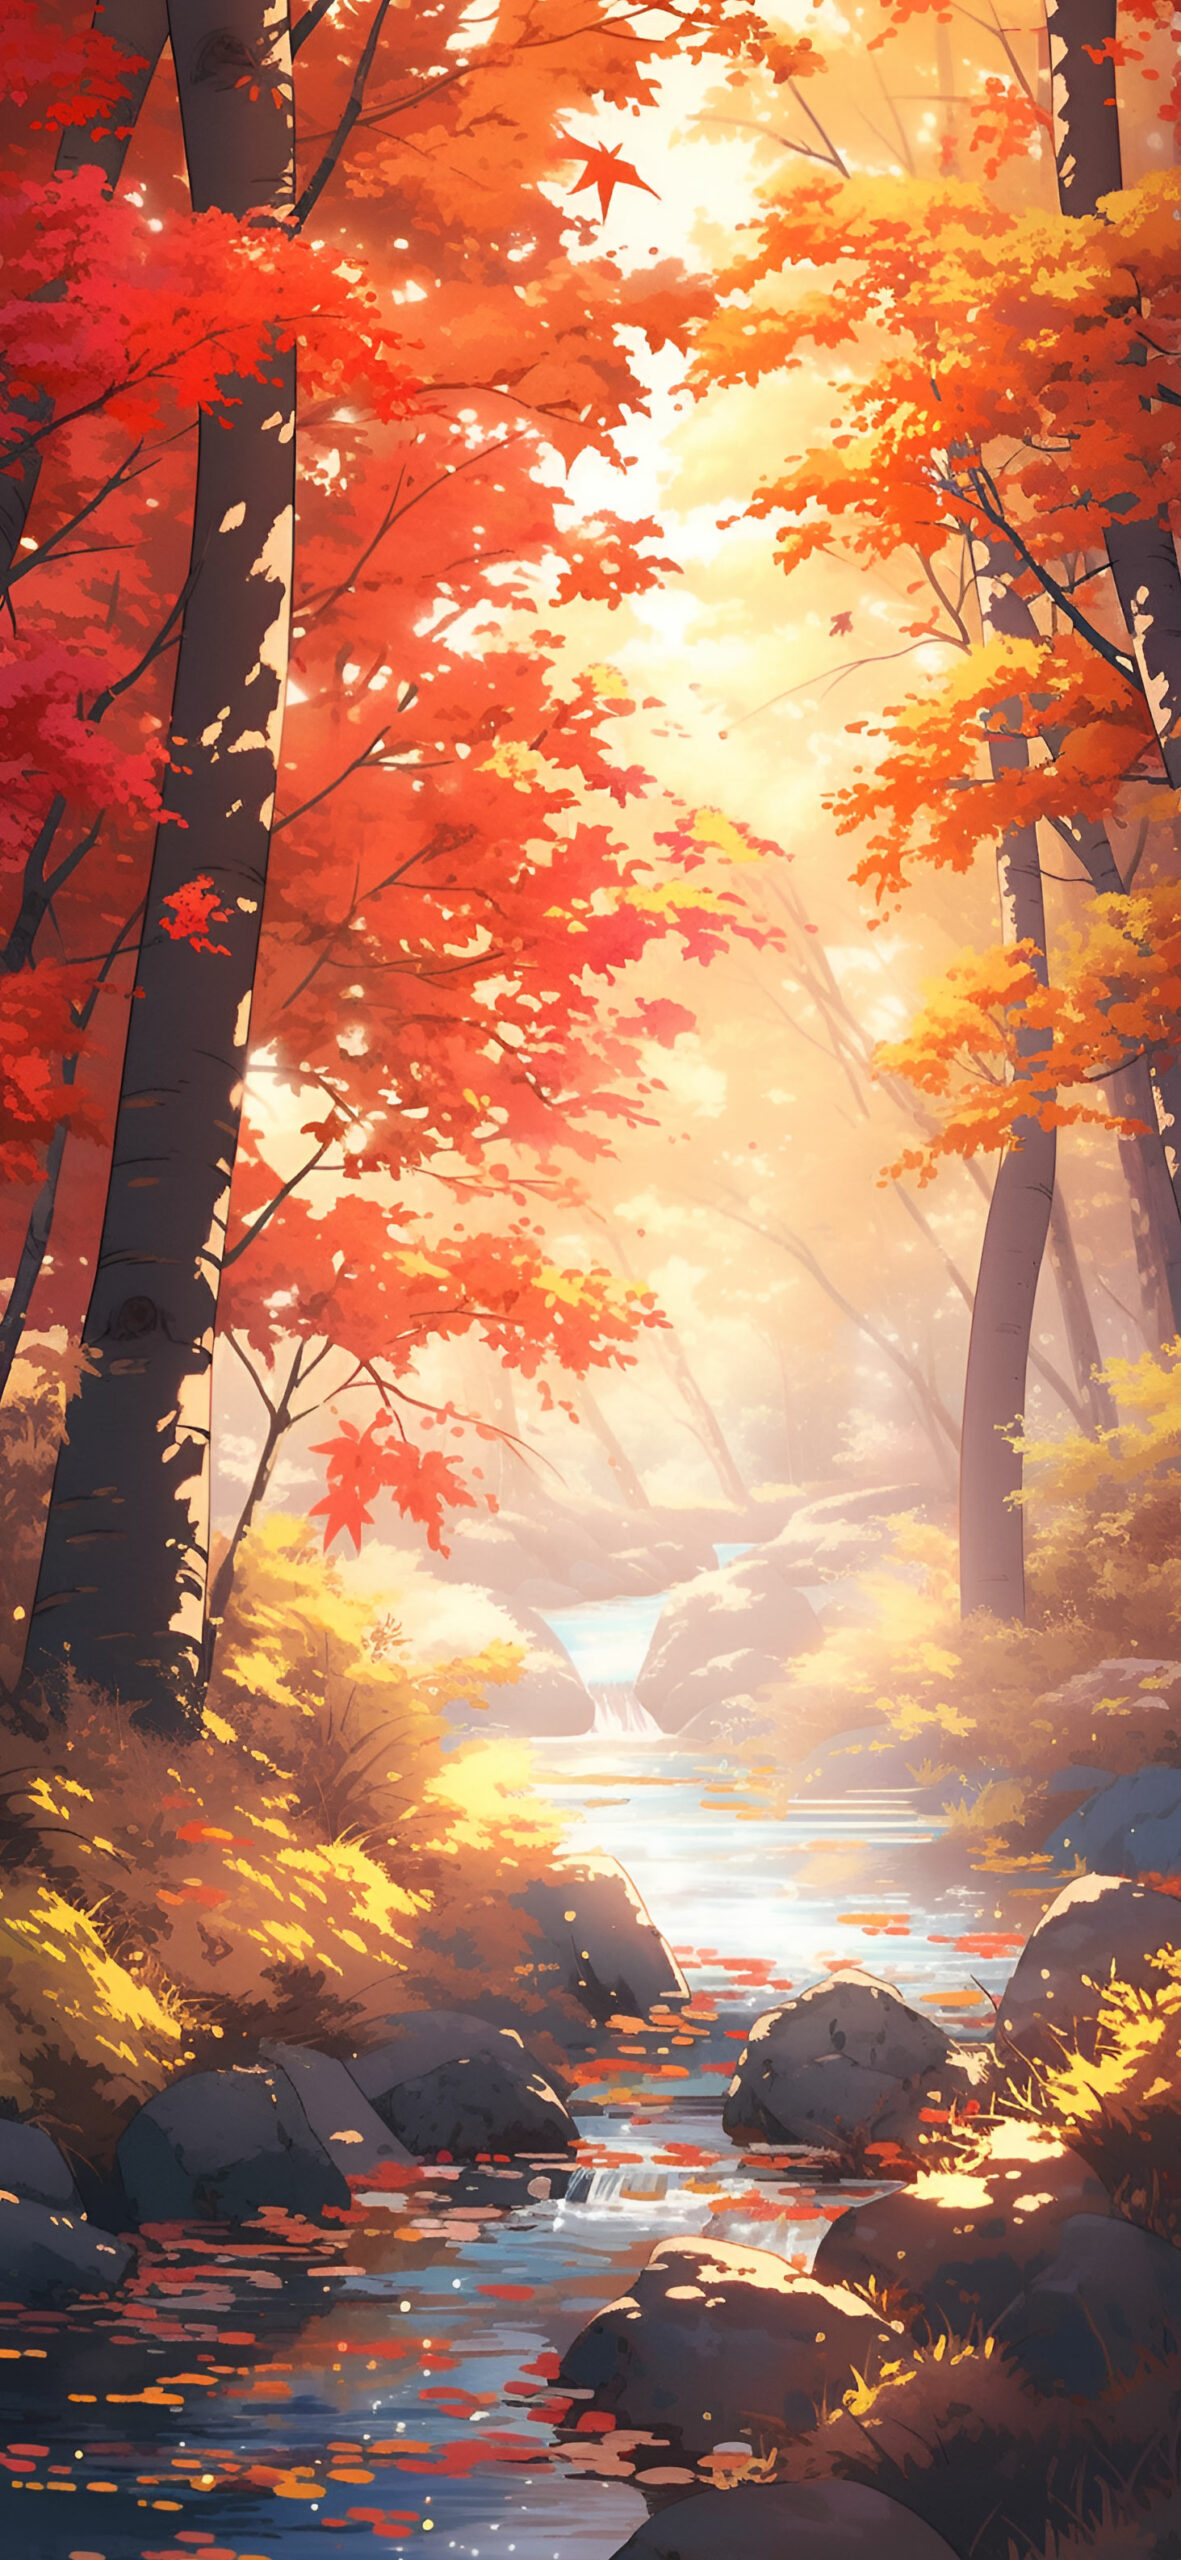 Stream in the autumn forest nature wallpaper Sunny fall forest